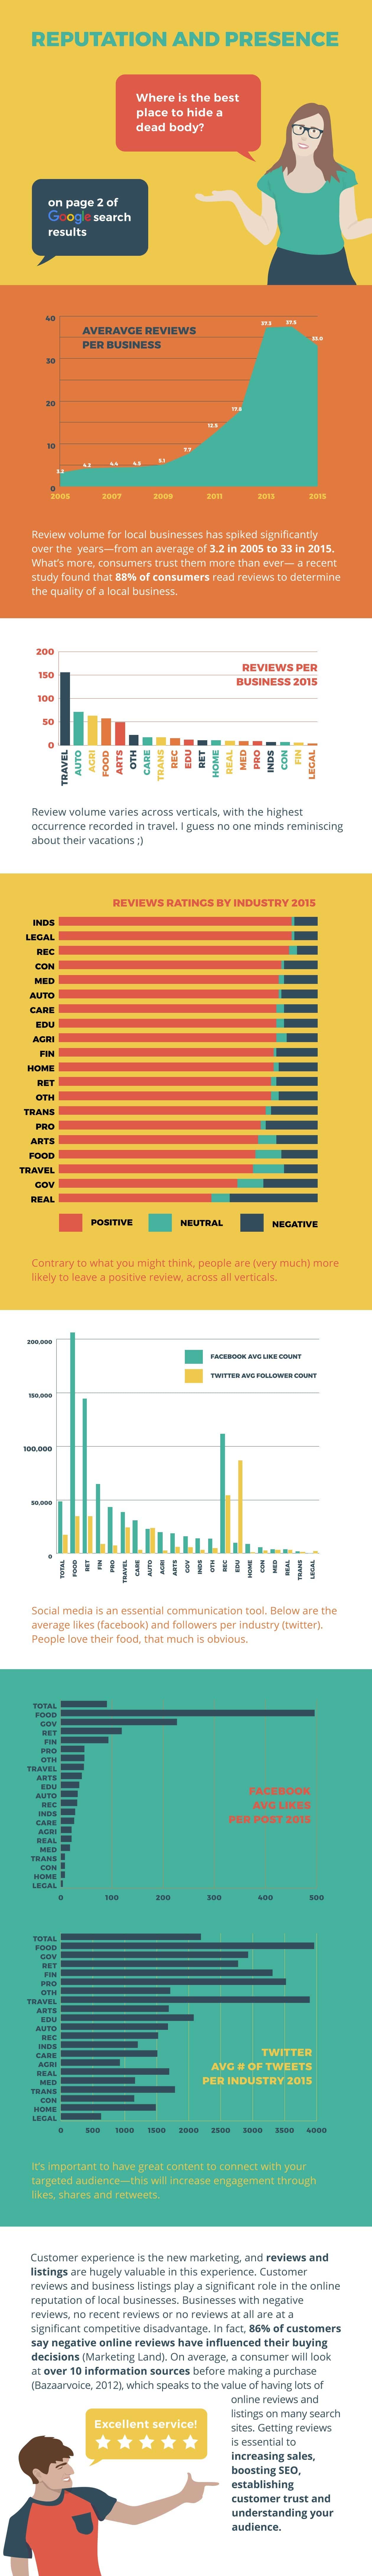 reputation and reviews by biz type infographic